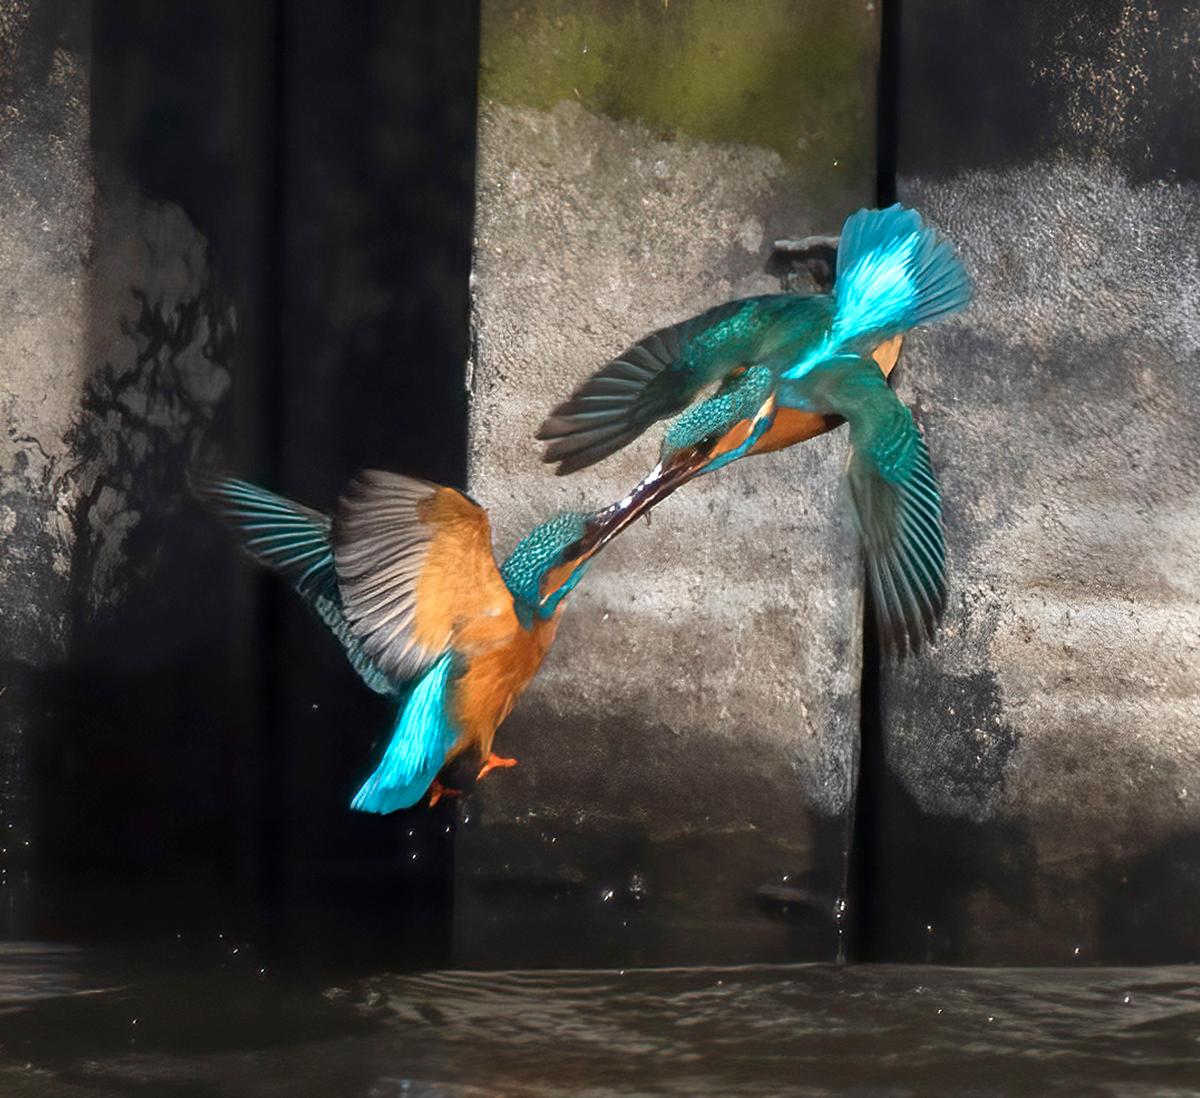 A pair of kingfishers were caught on camera battling mid-air over breeding territory. (Caters News)